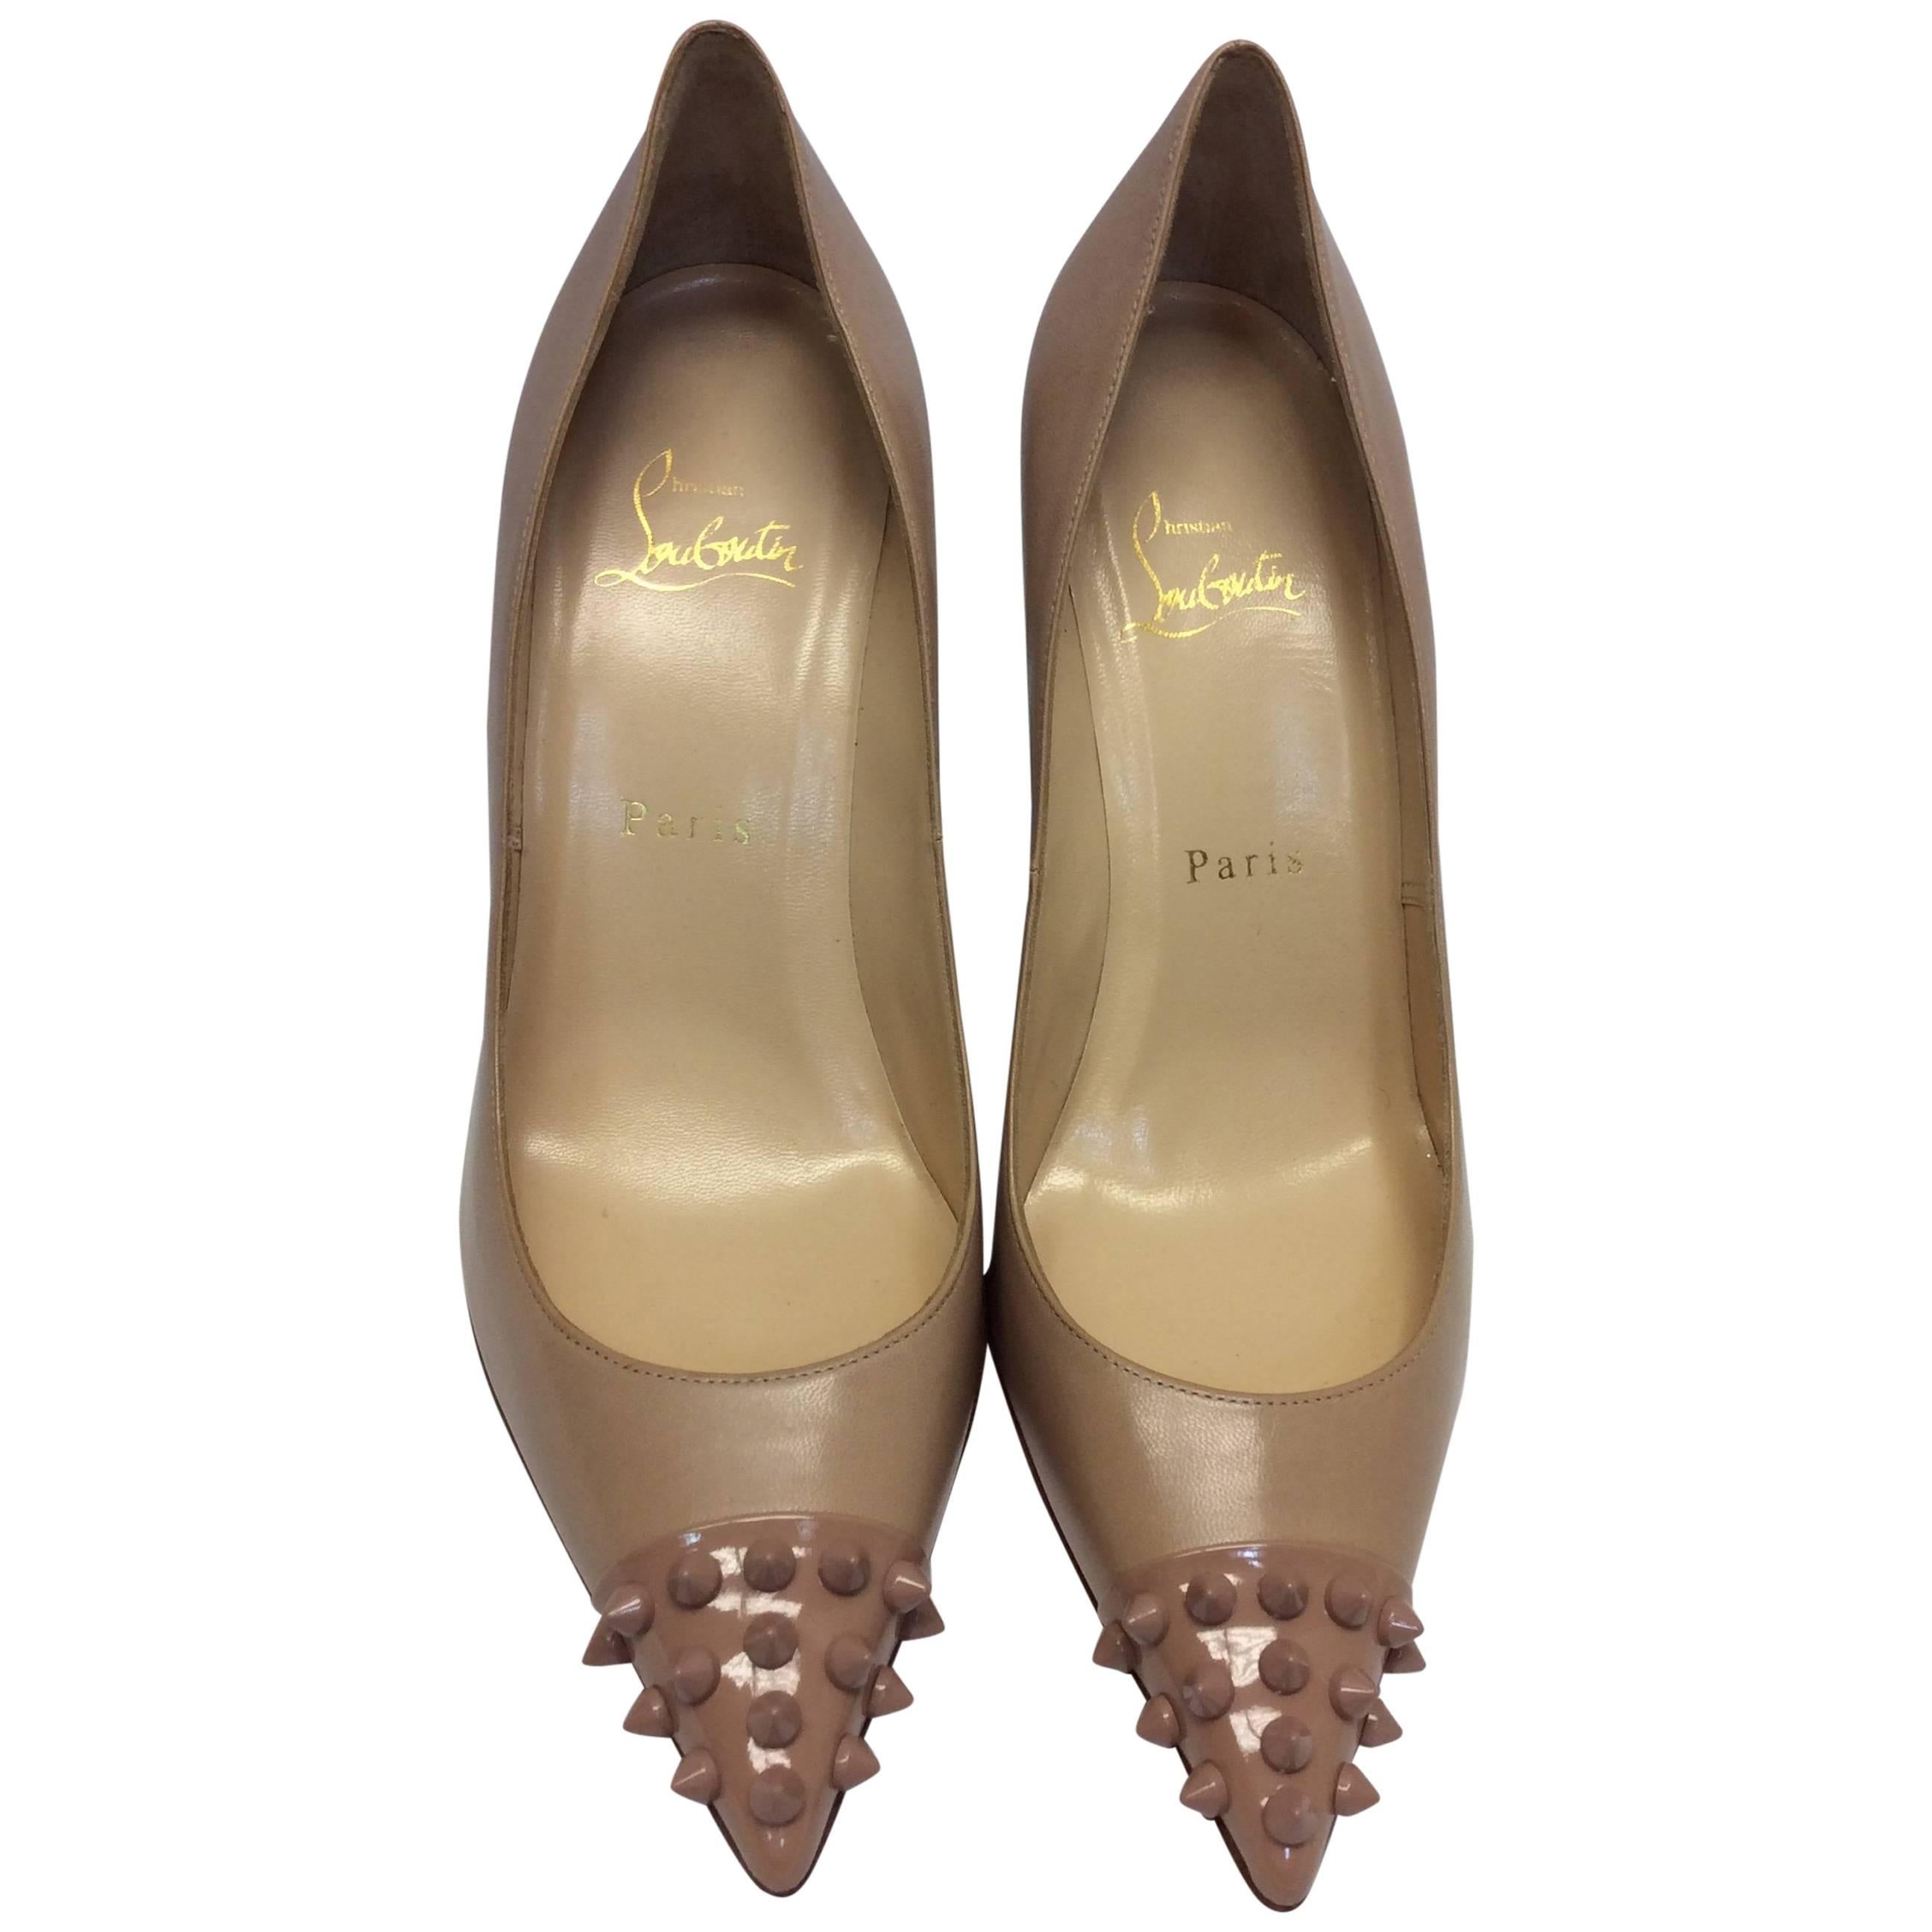 Christian Louboutin New Nude Studded Stiletto For Sale